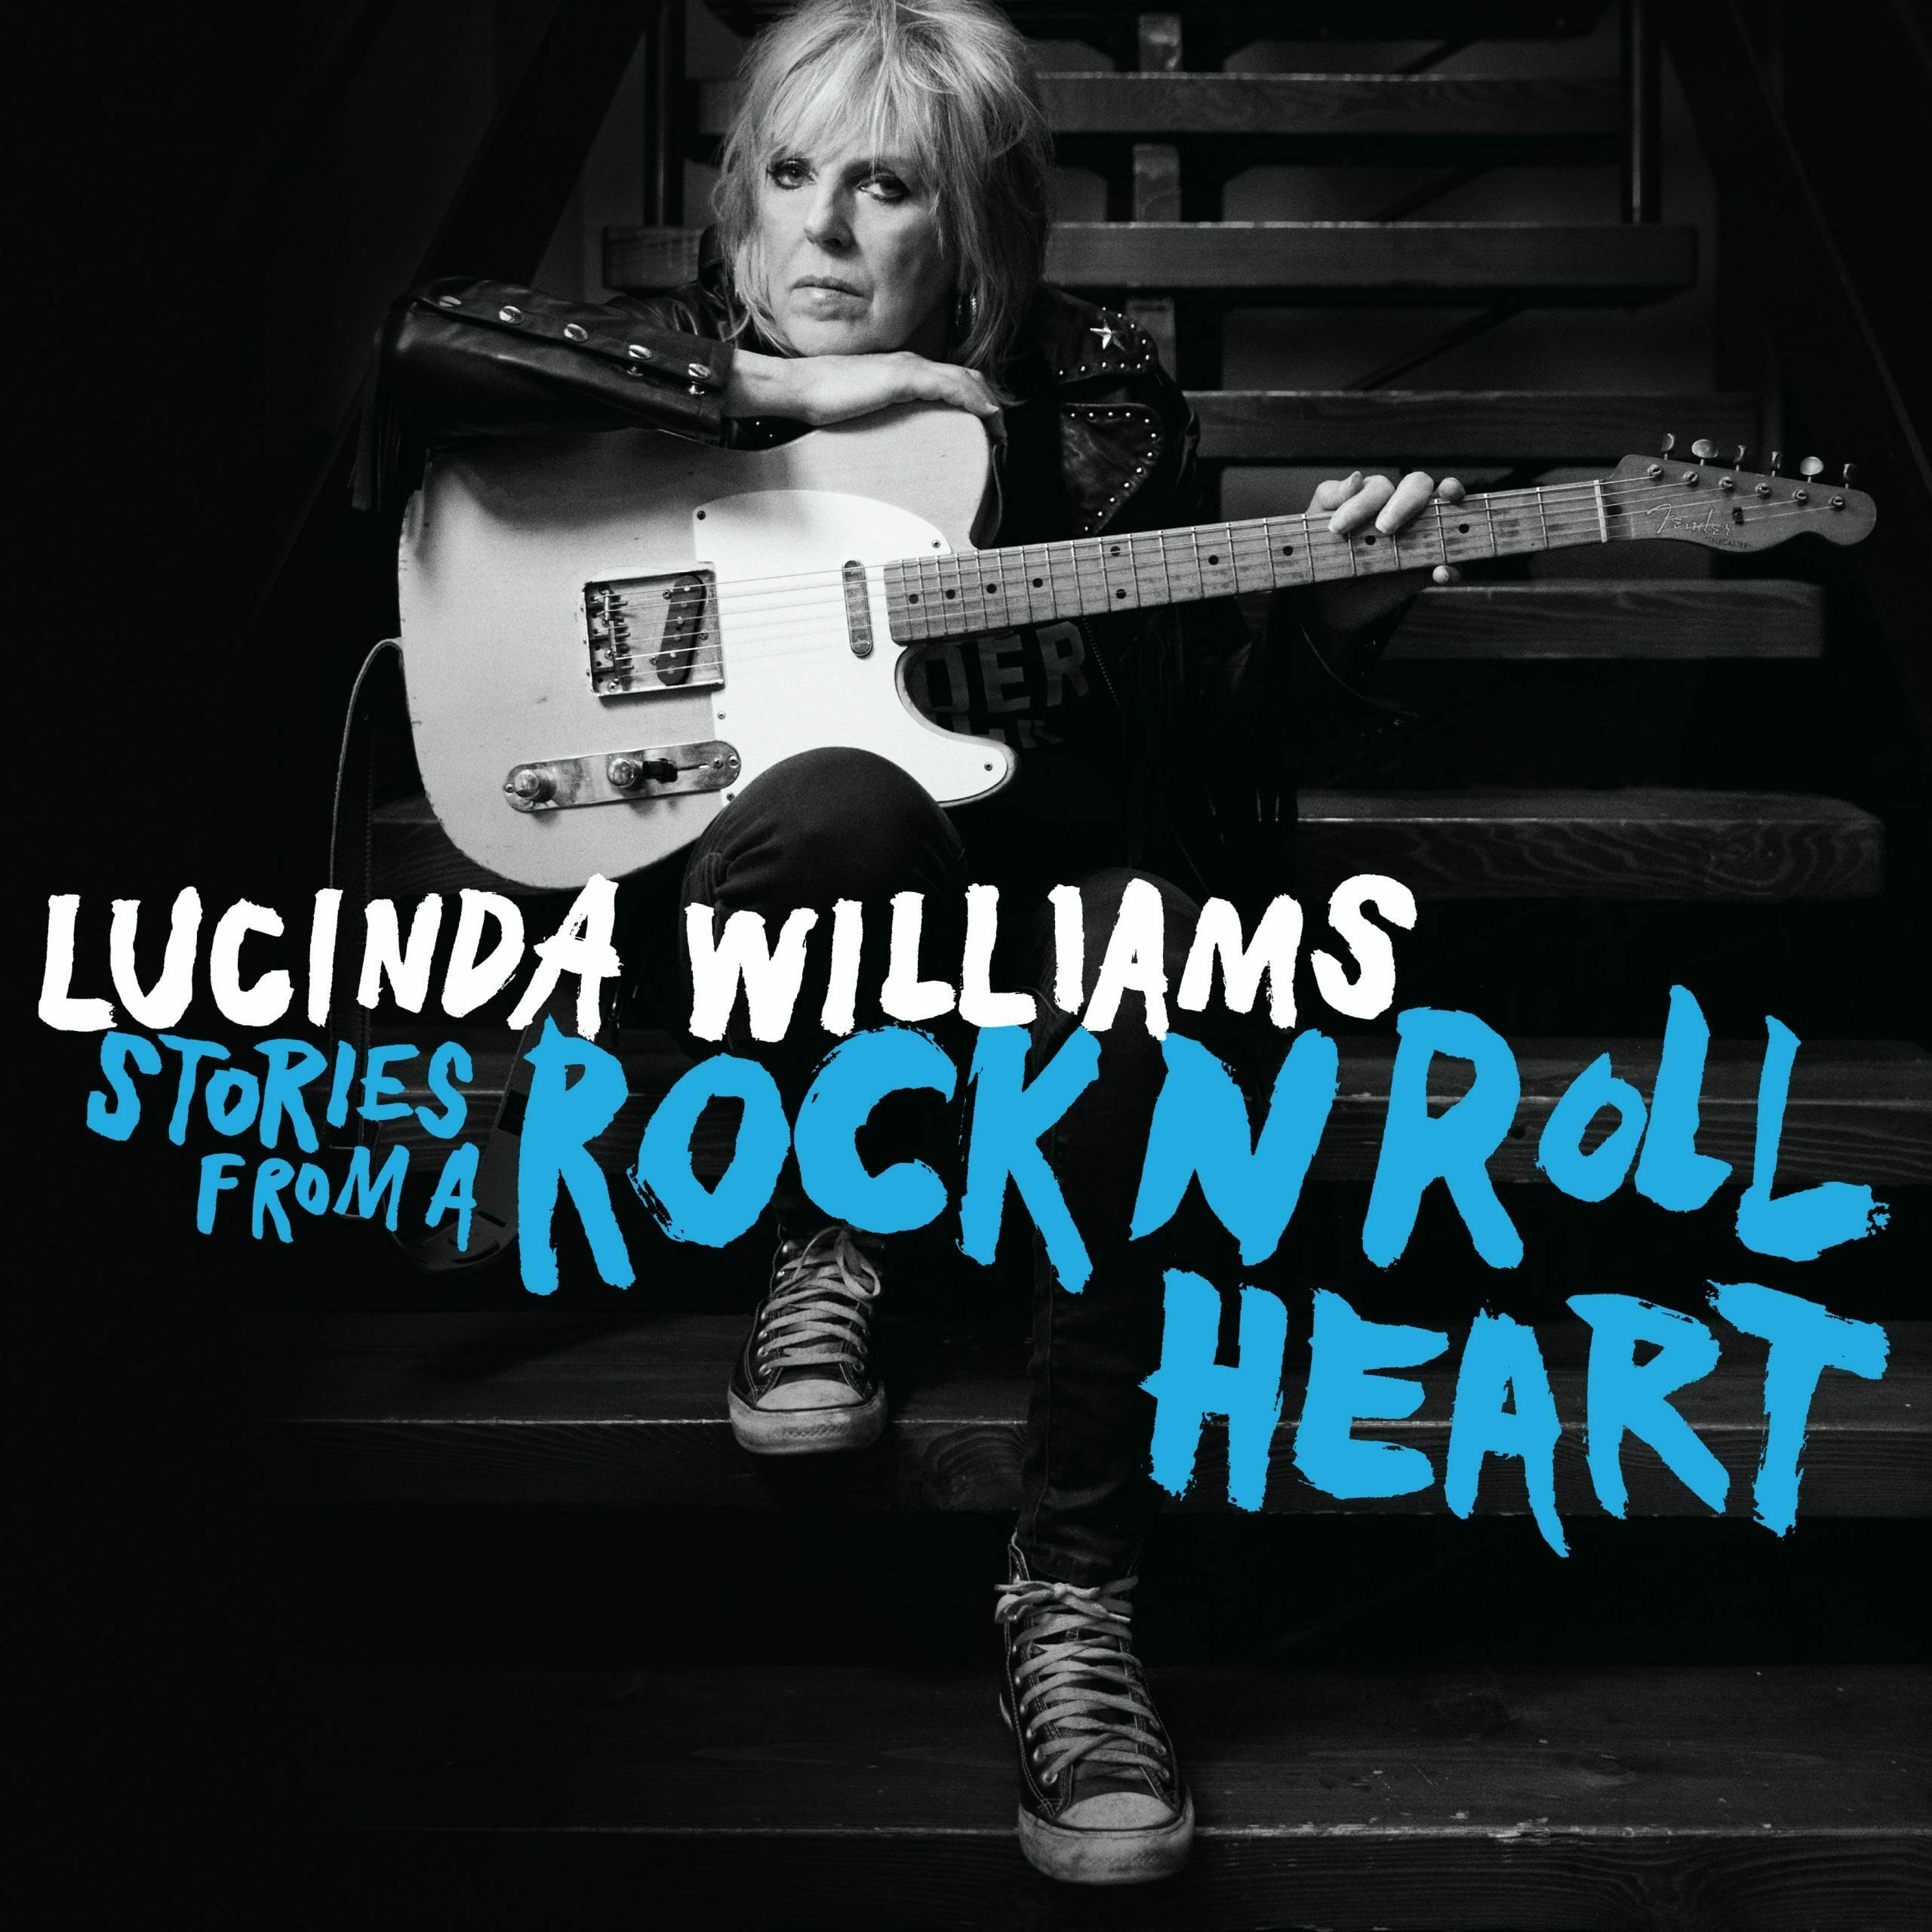 LUCINDA WILLIAMS: Stories from a Rock’n’roll Heart